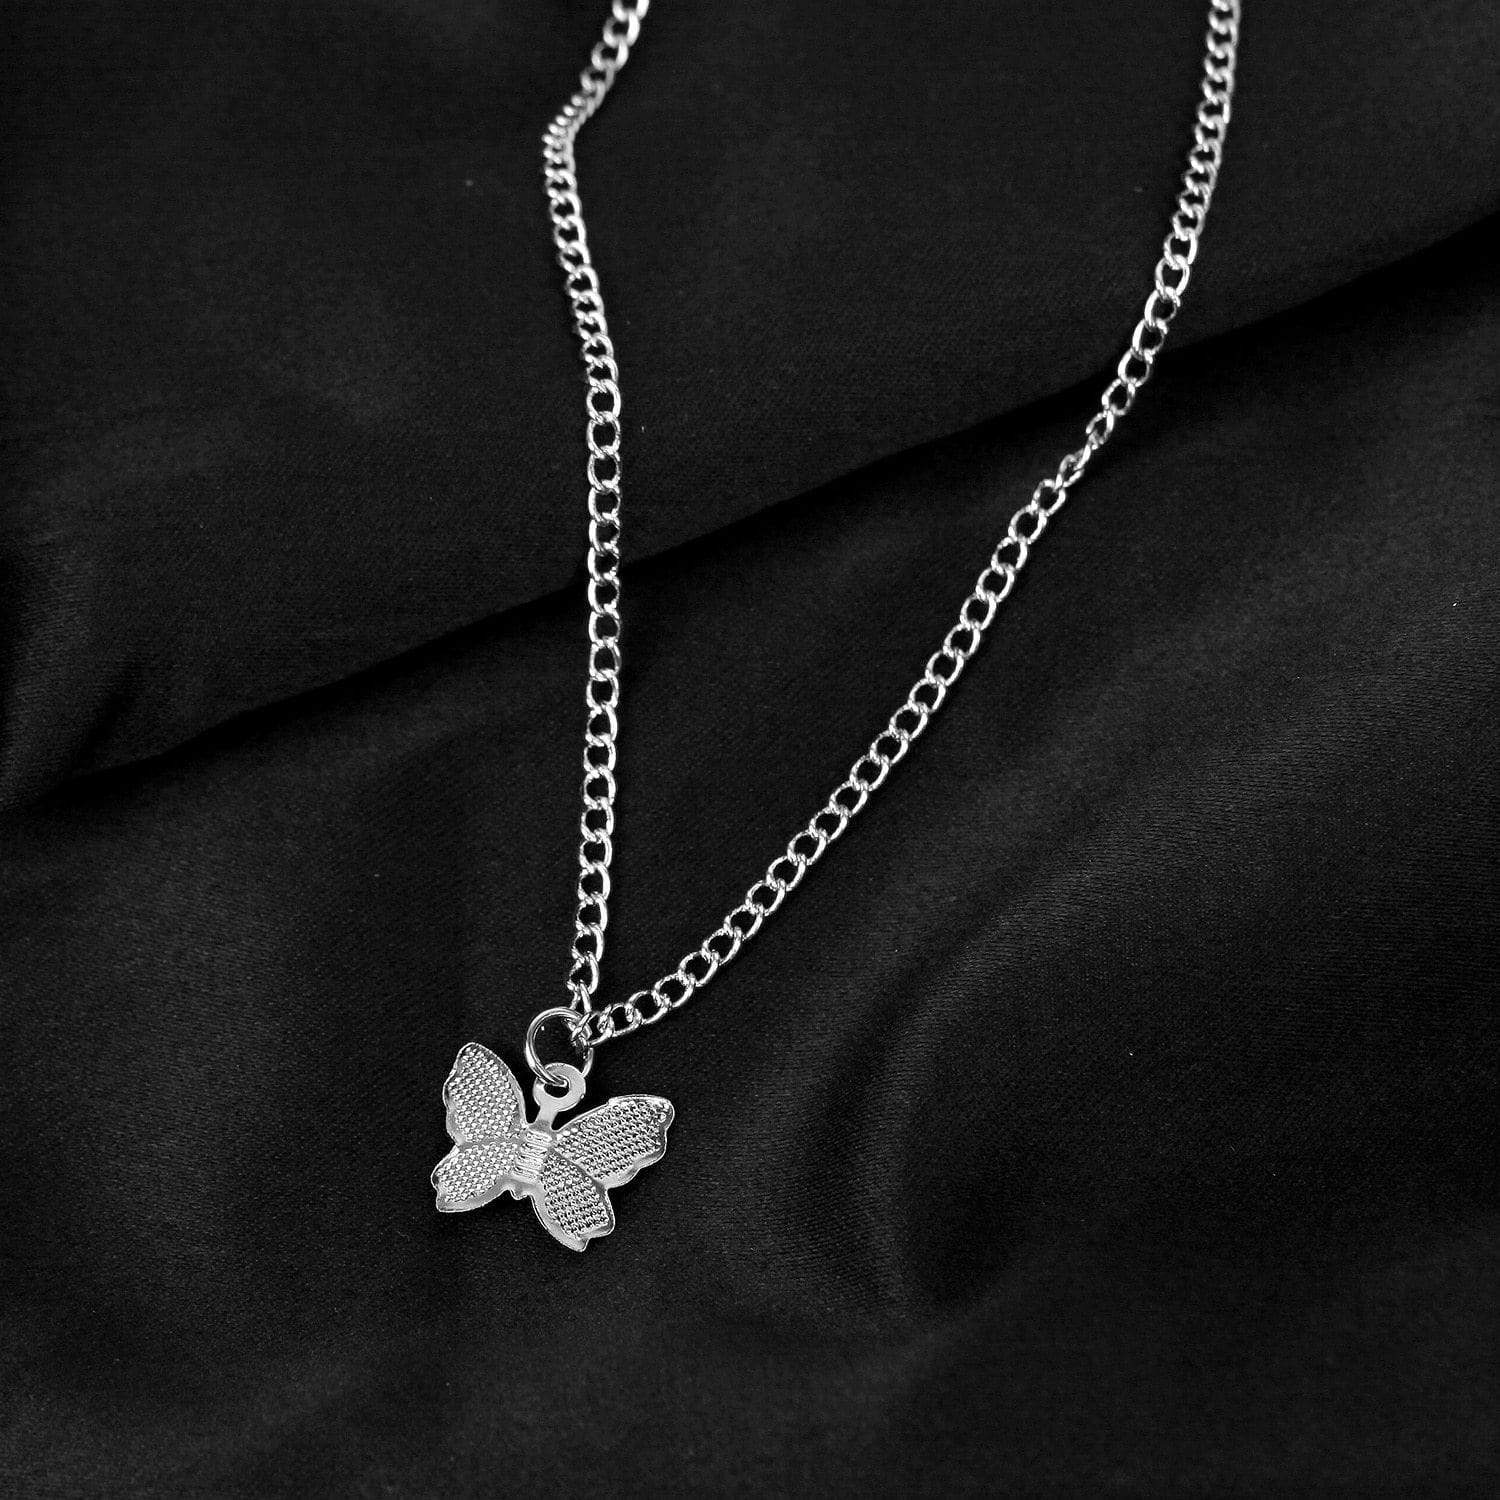 Y2Bae Necklace Butterfly Silver 1 Delilah Necklace